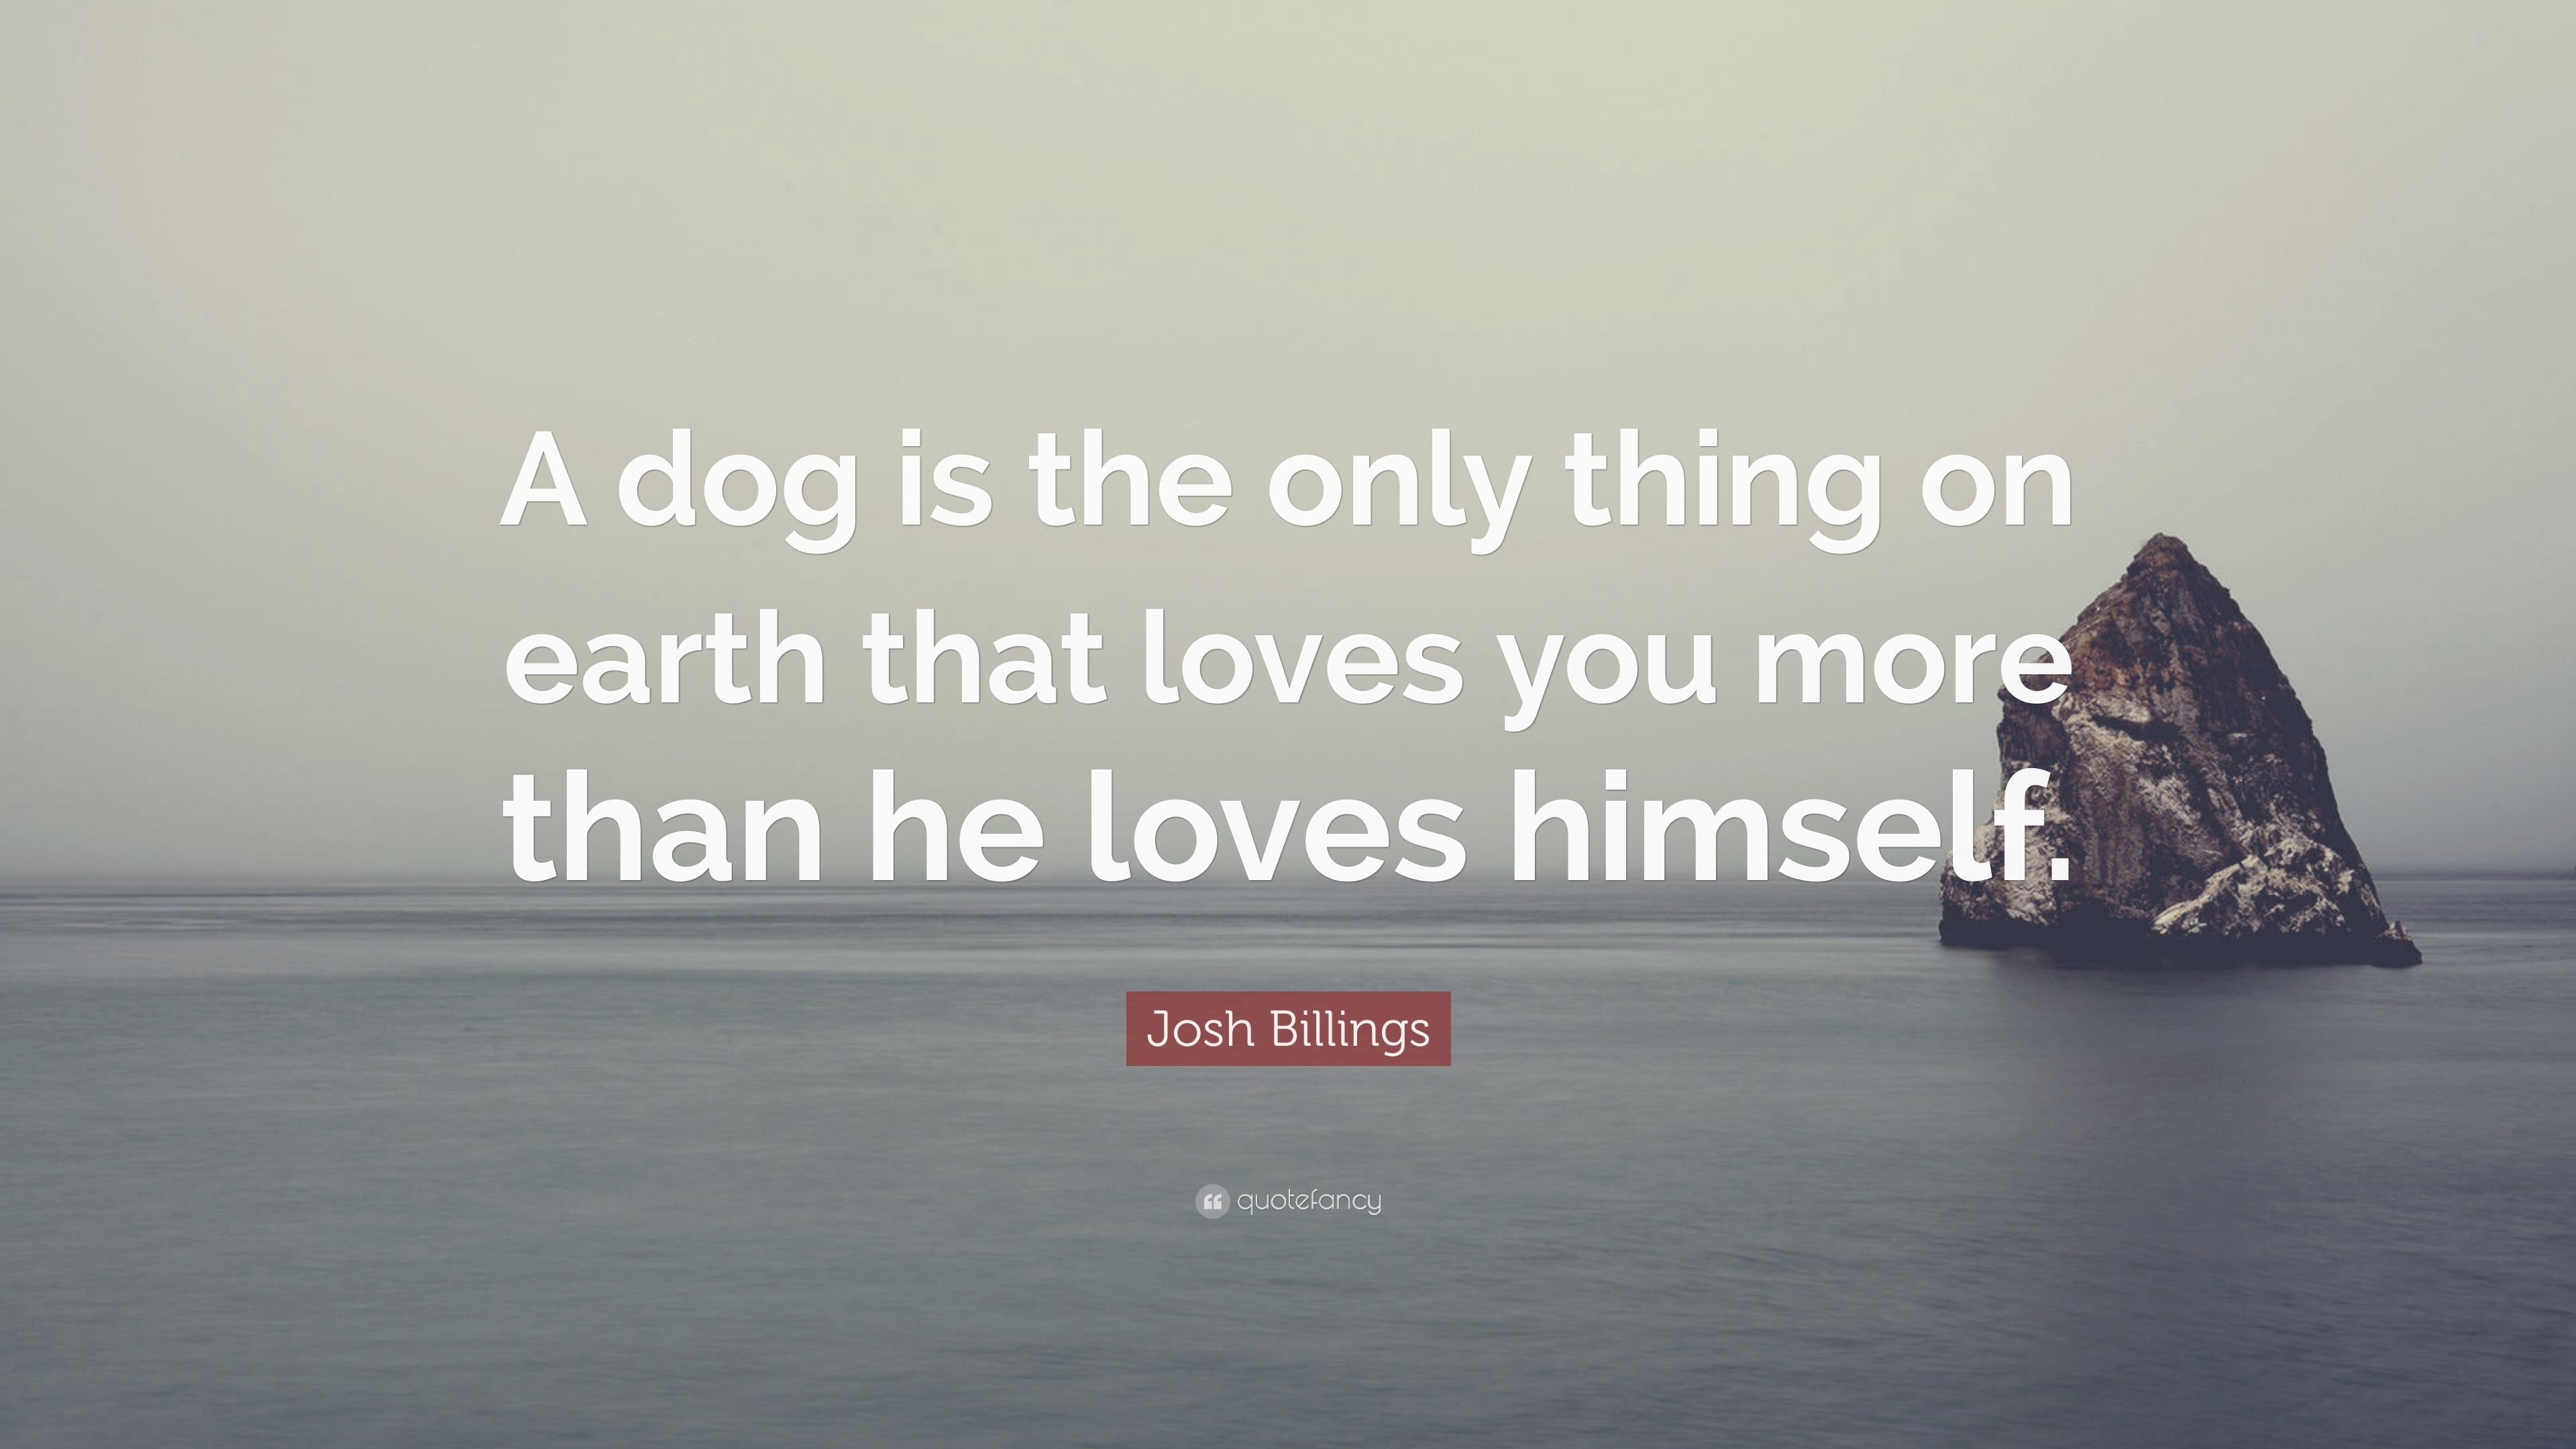 Josh Billings Quote: “A dog is the only thing on earth that loves you ...